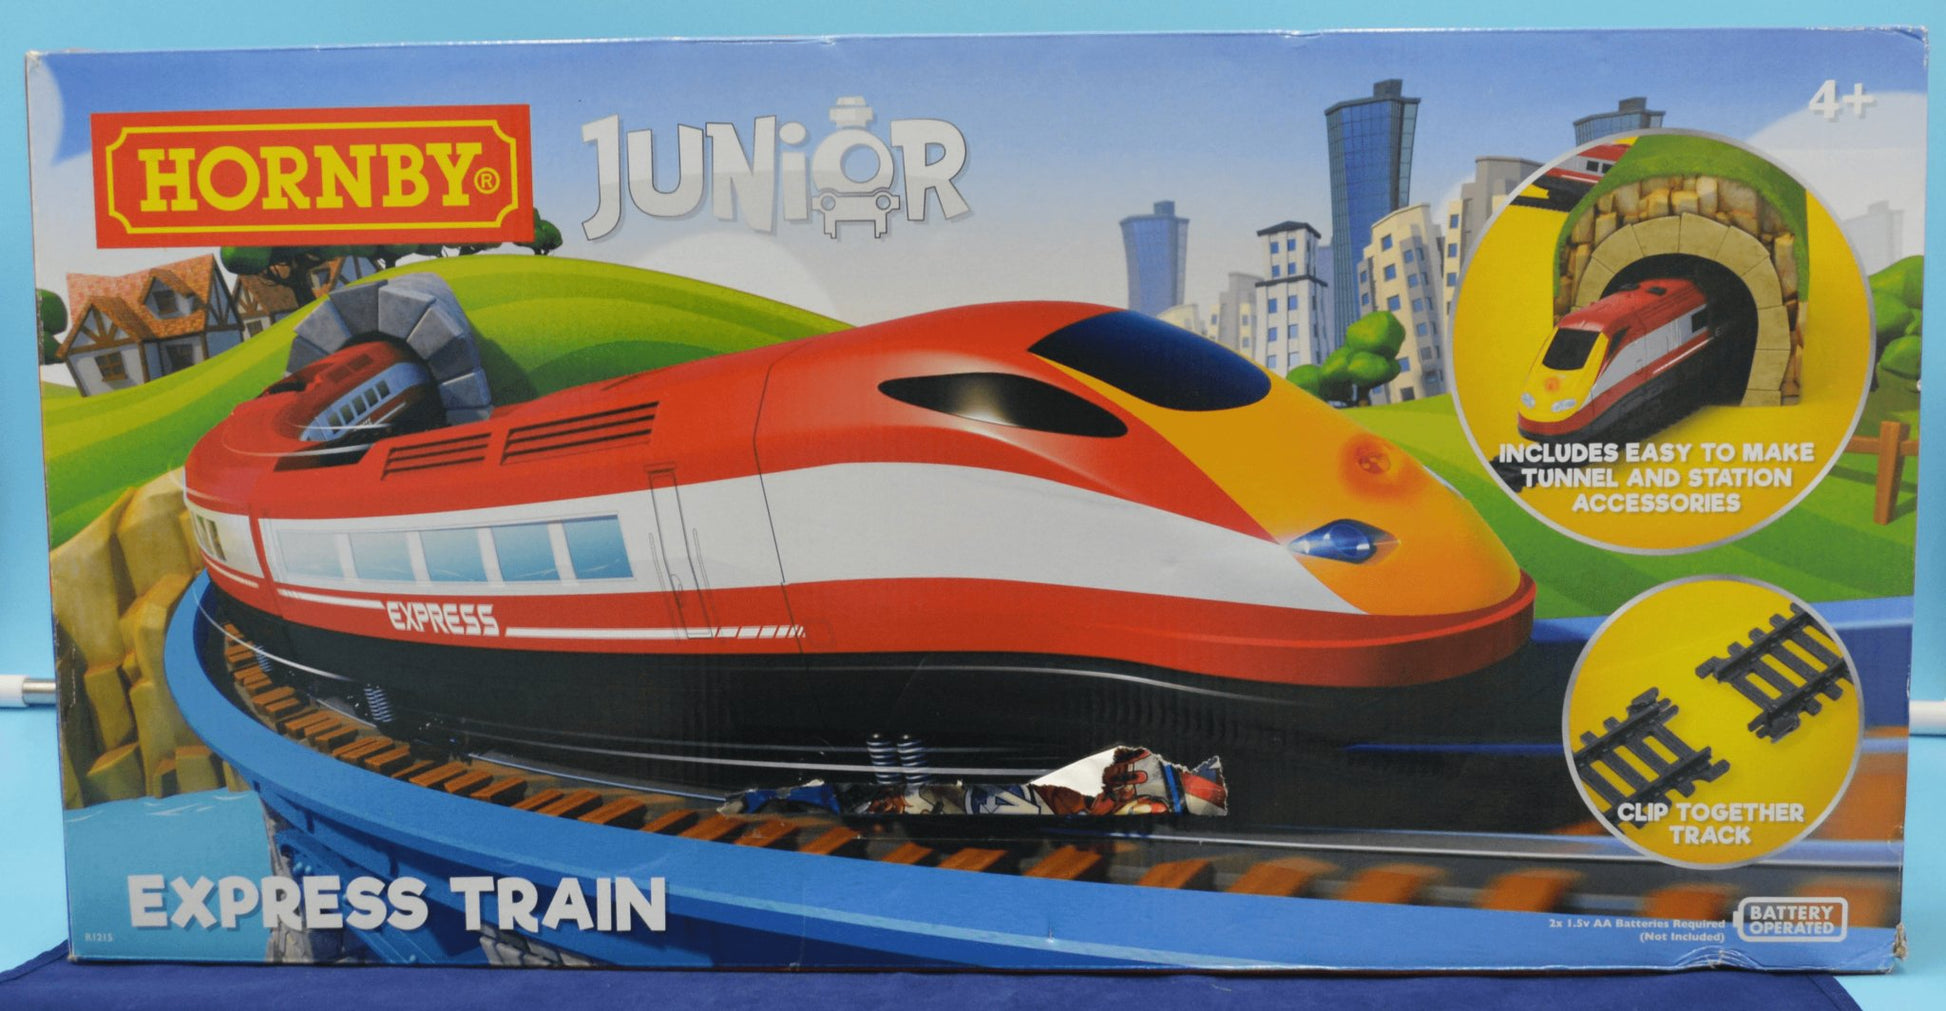 HORNBY JUNIOR BATTERY OPERATED EXPRESS TRAIN SET - TMD167207